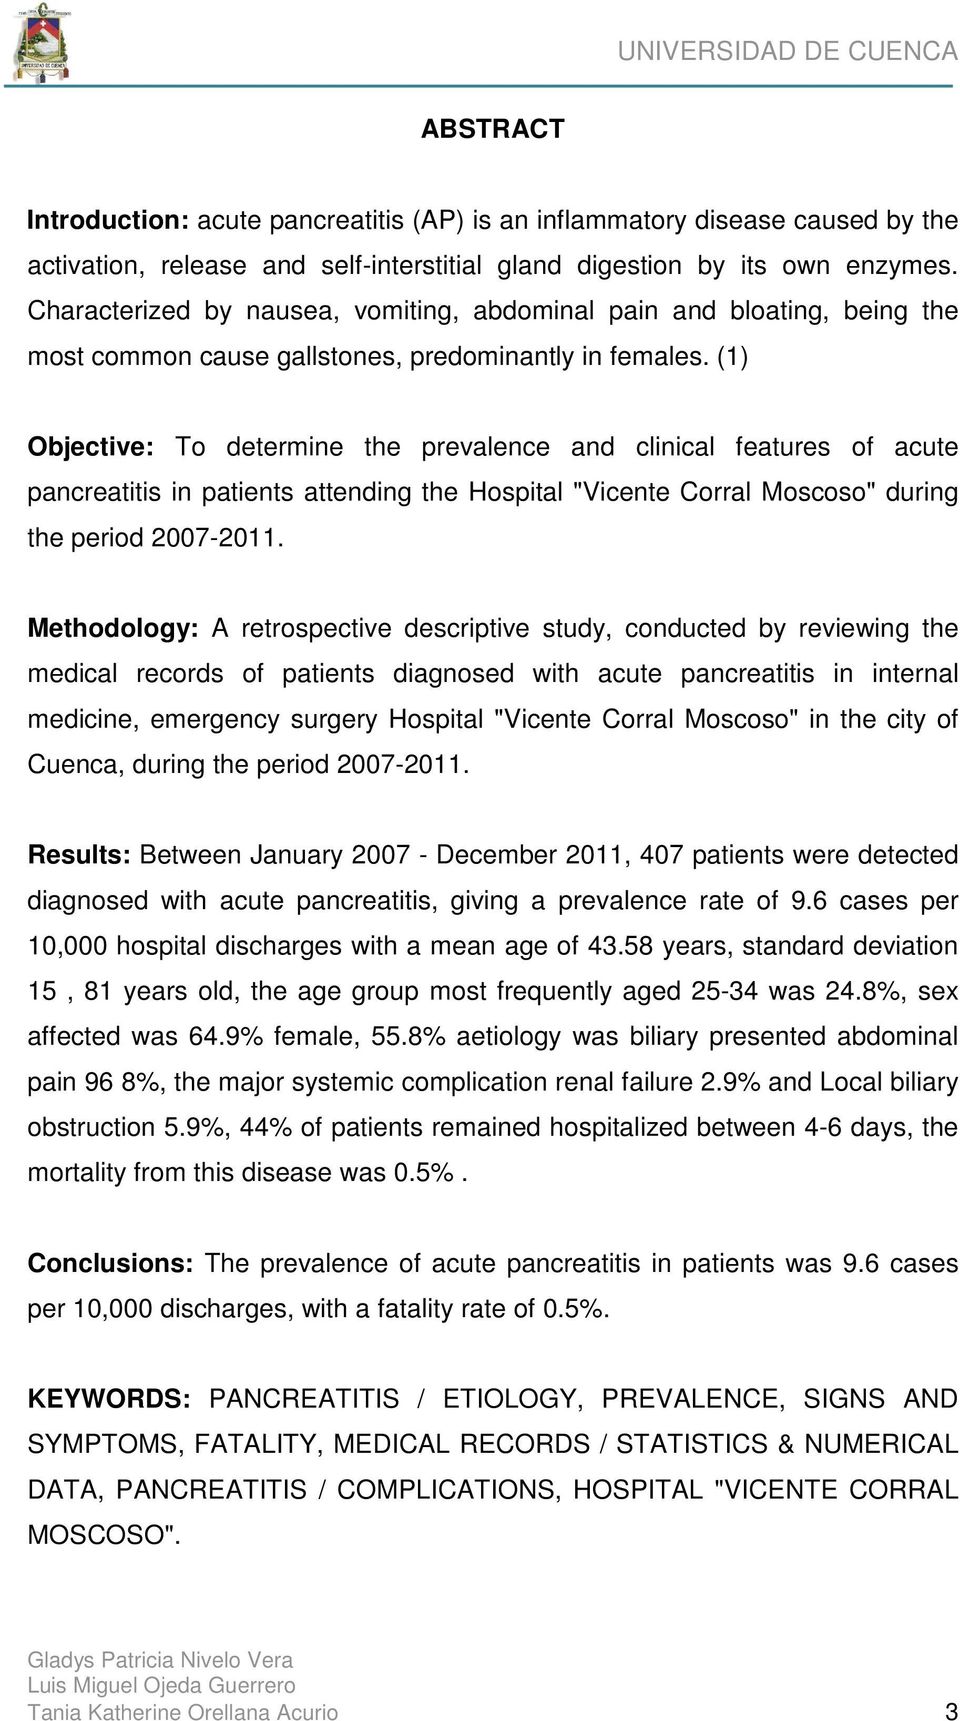 (1) Objective: To determine the prevalence and clinical features of acute pancreatitis in patients attending the Hospital "Vicente Corral Moscoso" during the period 2007-2011.